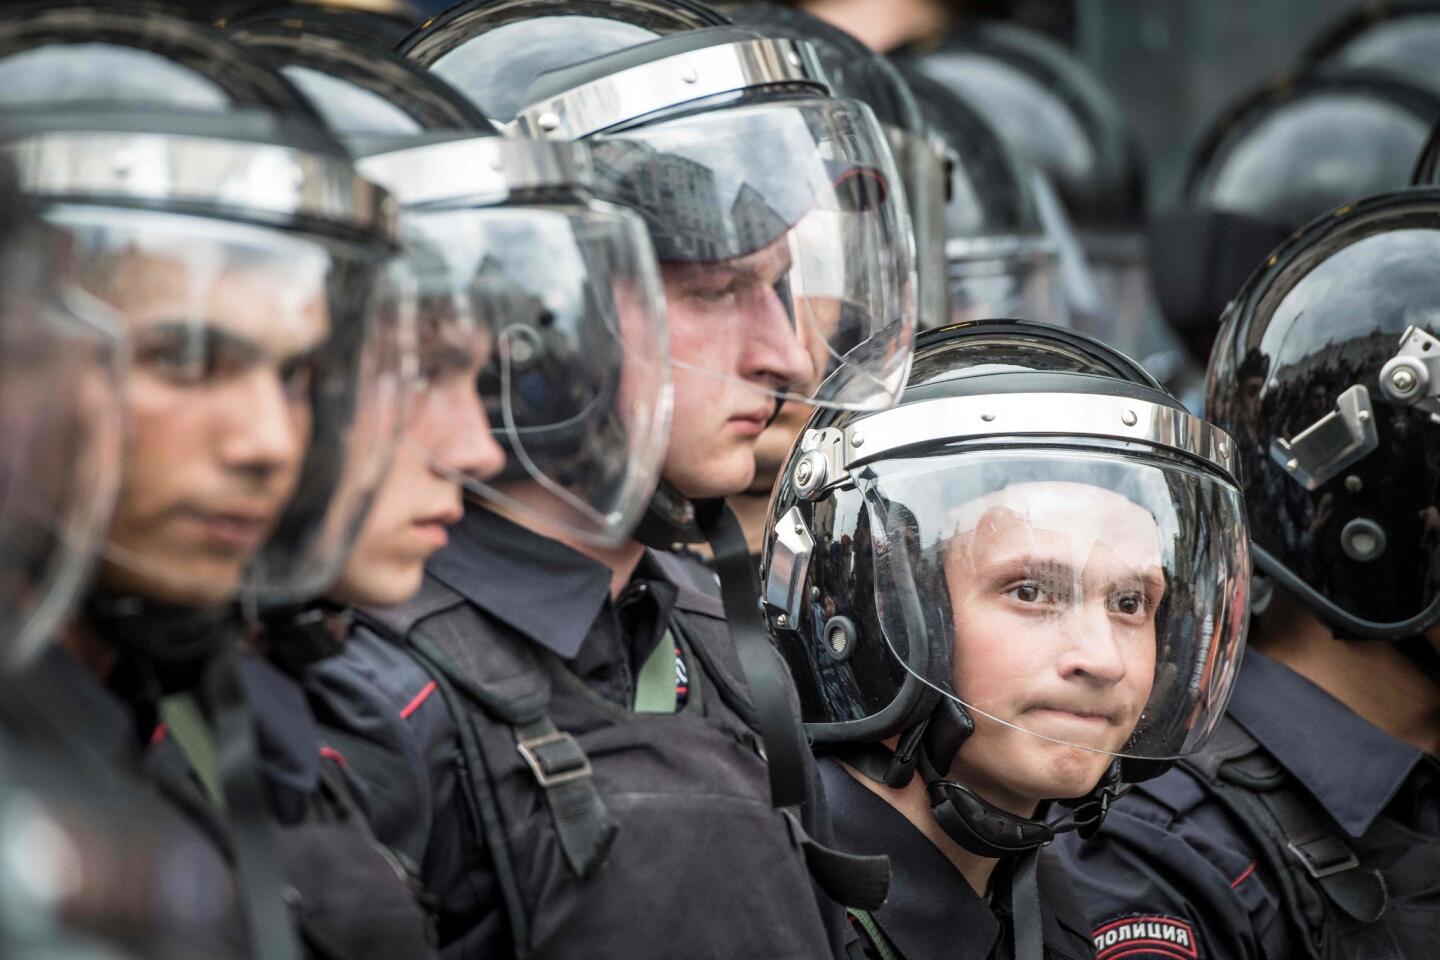 Thousands of anti-government activists protesting across Russia